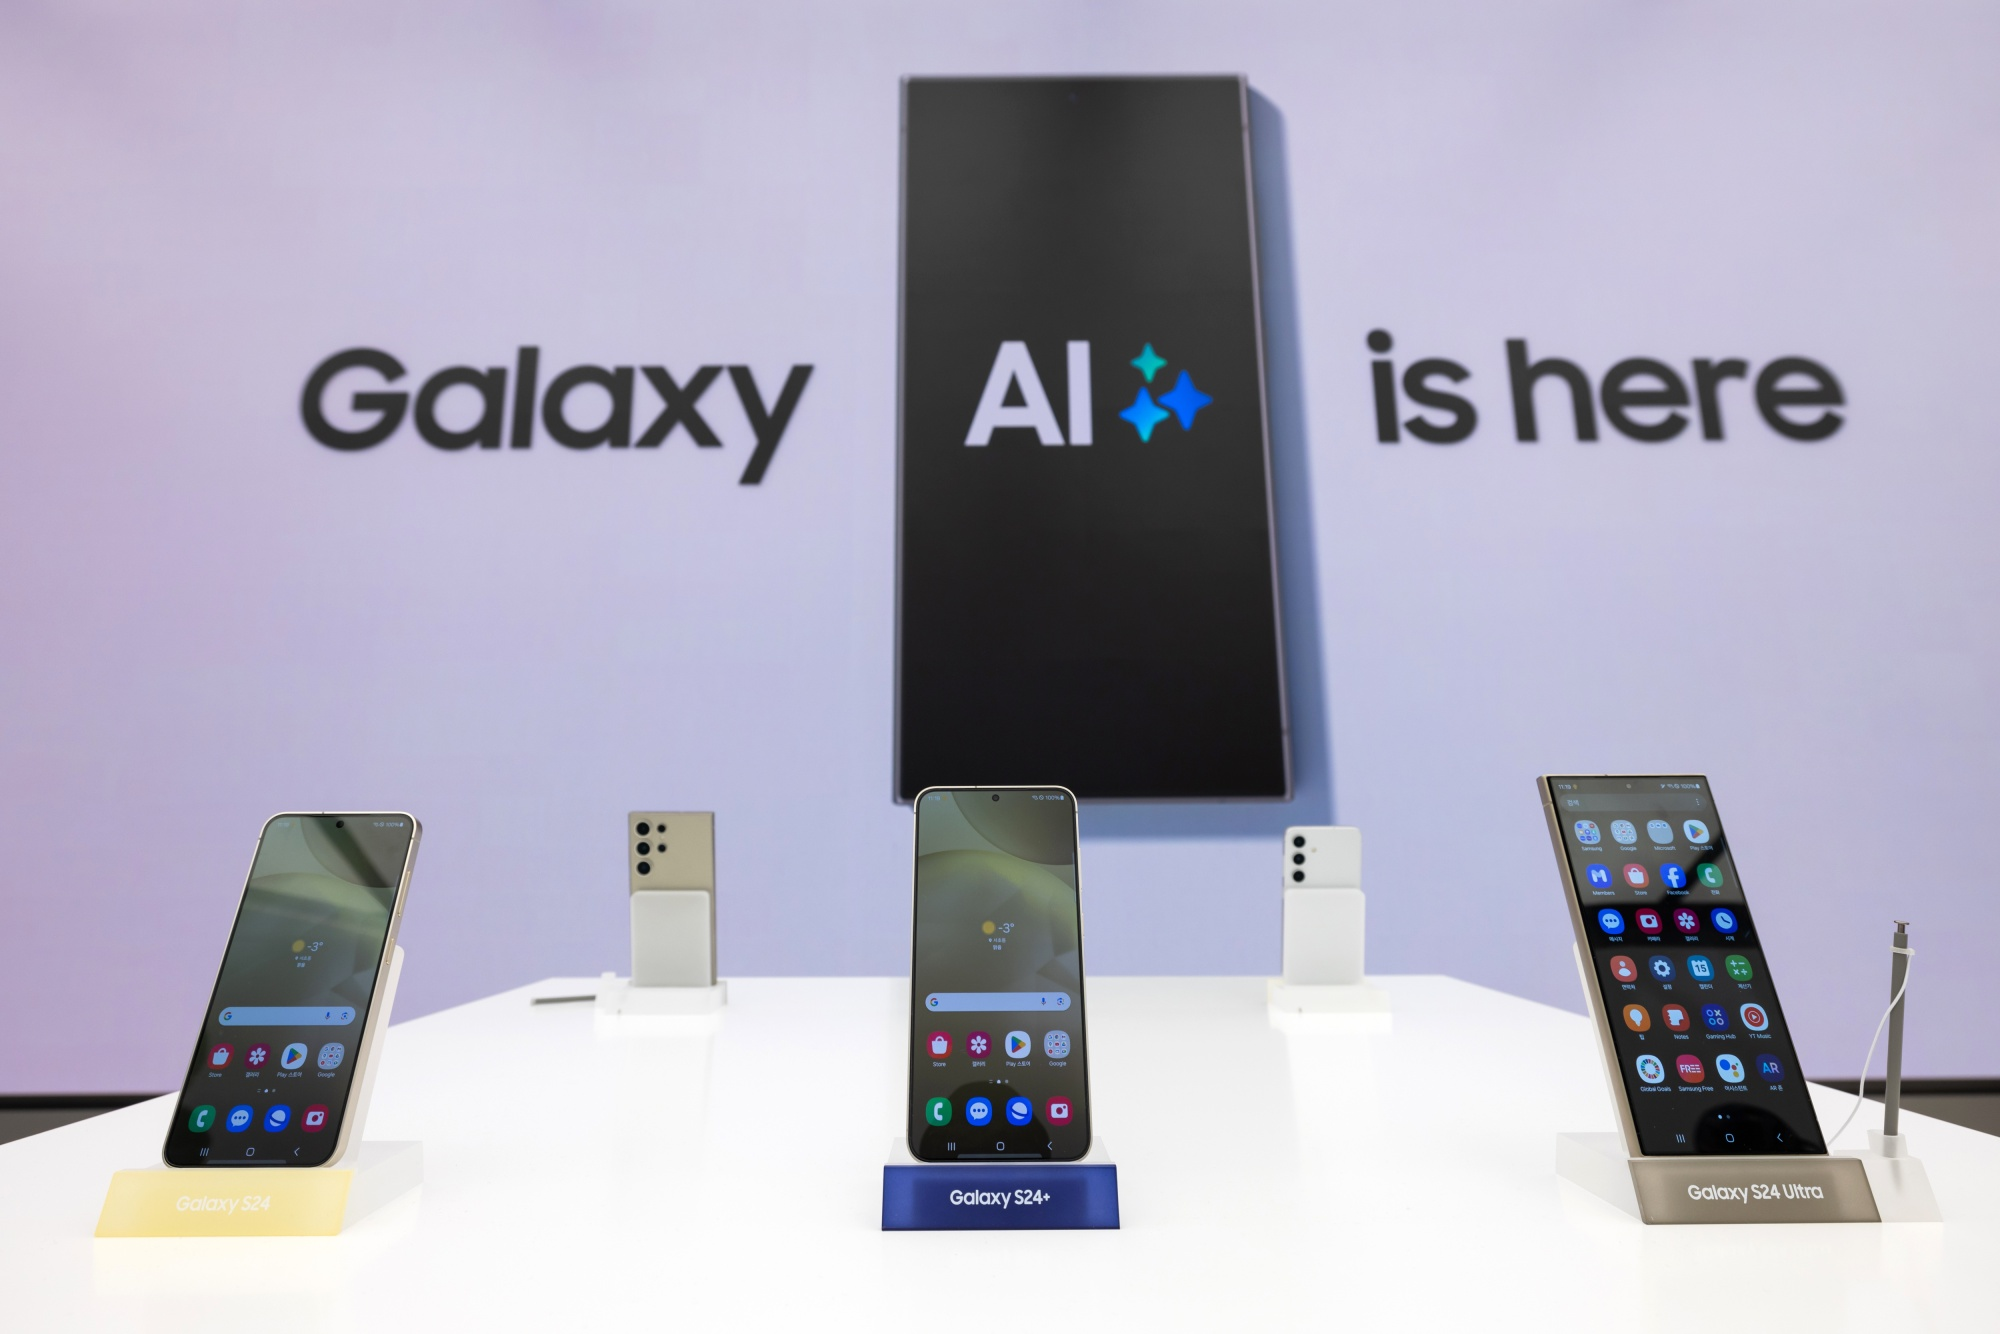 Old Samsung devices will get Galaxy AI upgrade through the One UI 6.1 update.